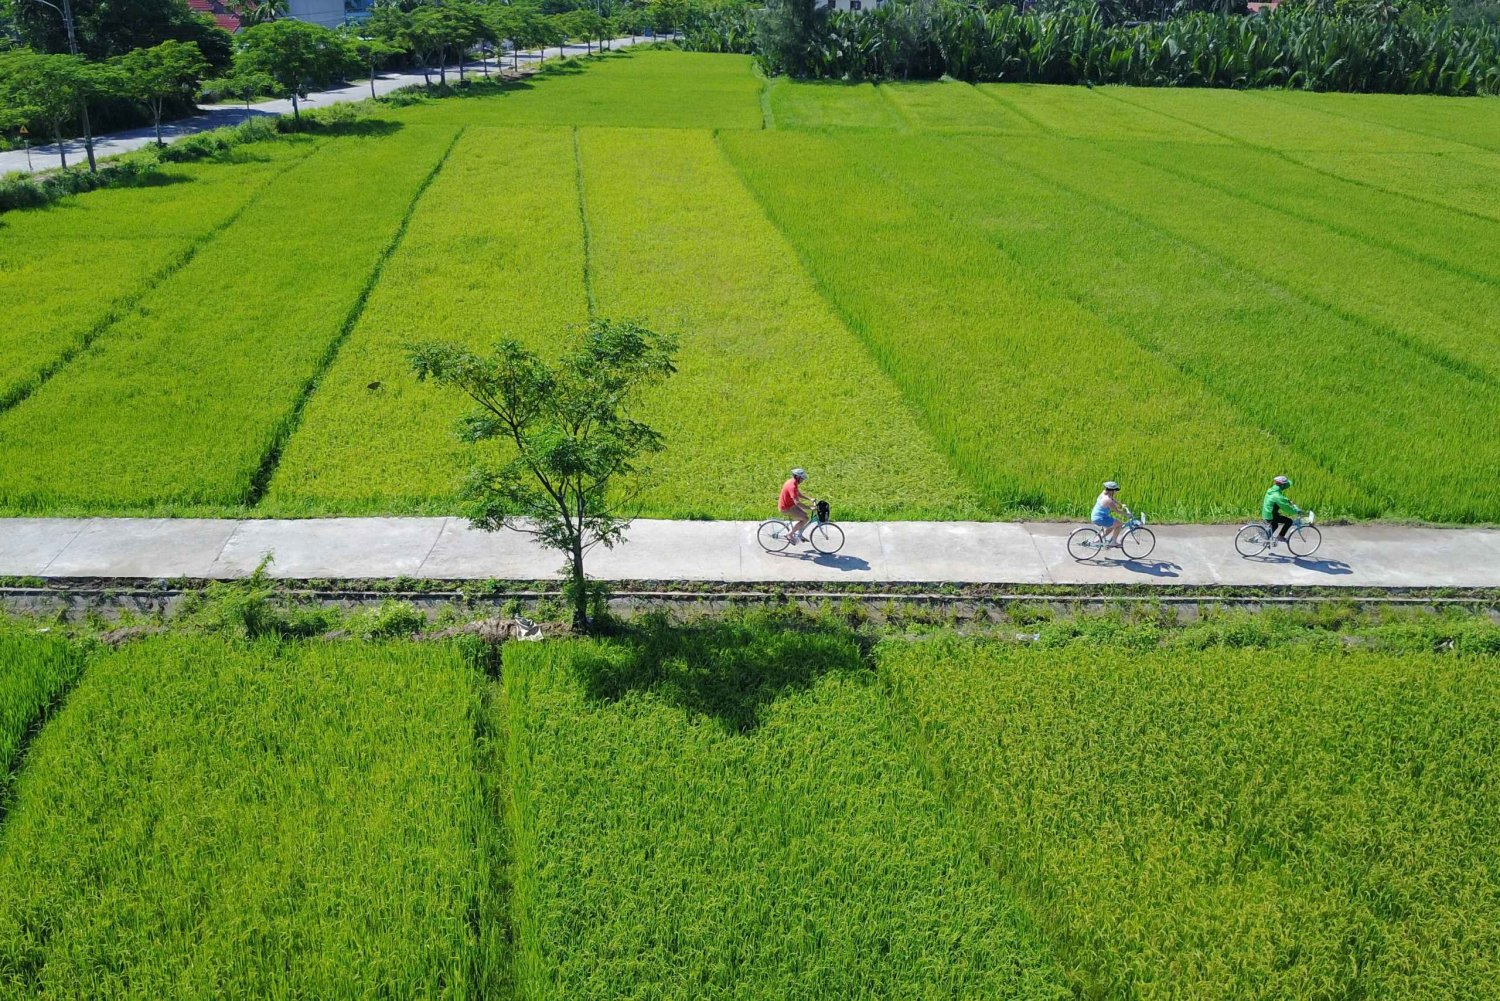 Hoi An: Farming and Fishing Tour with Bike and River Cruise